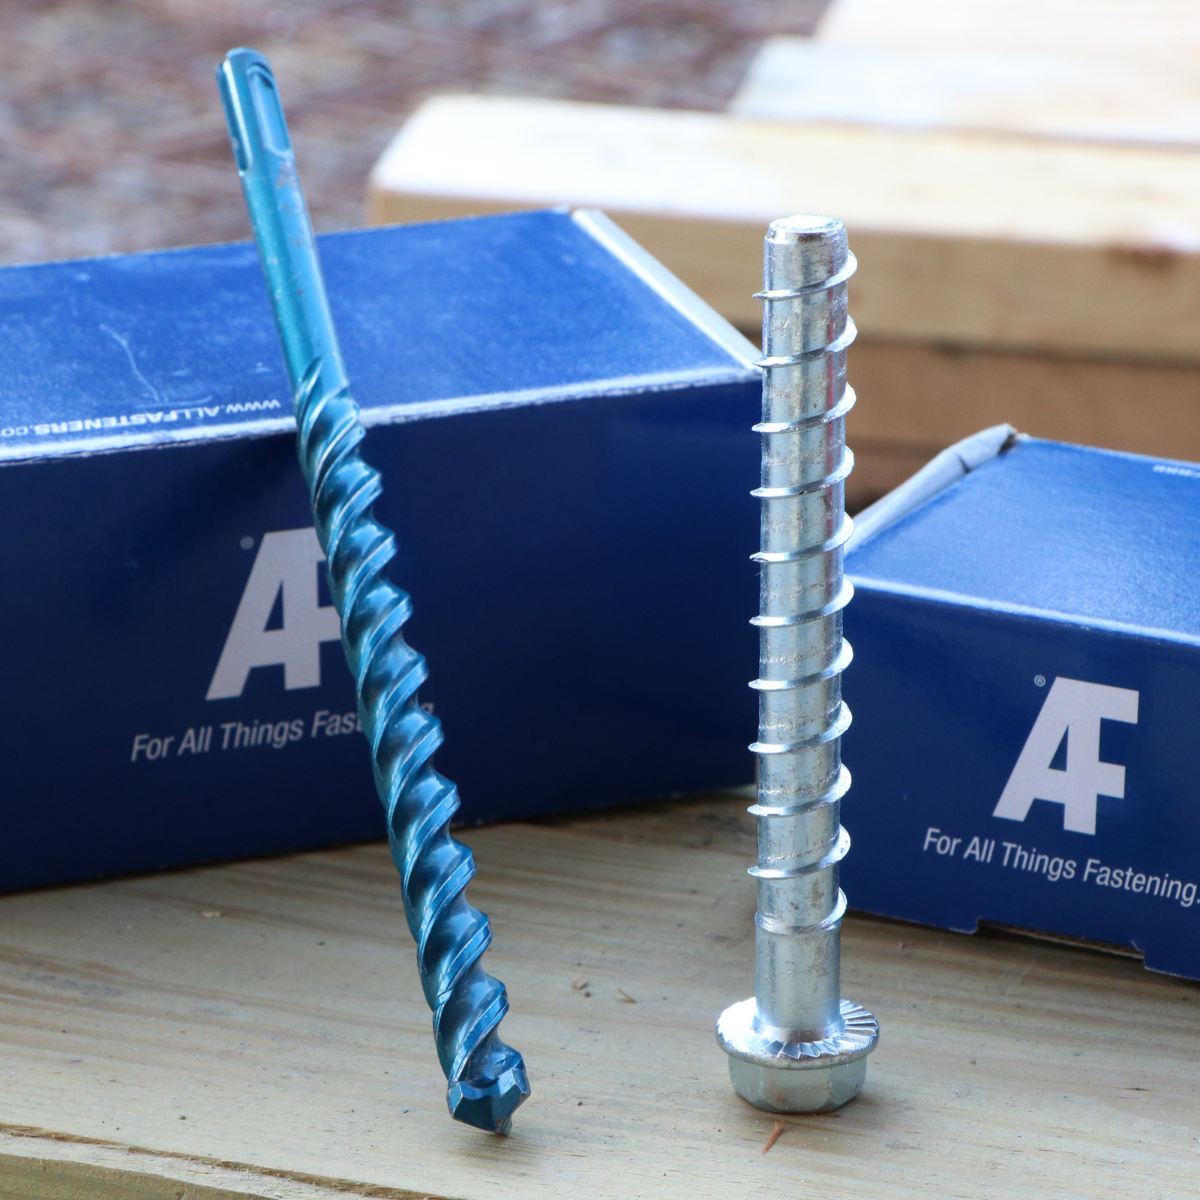 Benefits of Using A Concrete Screw Anchor